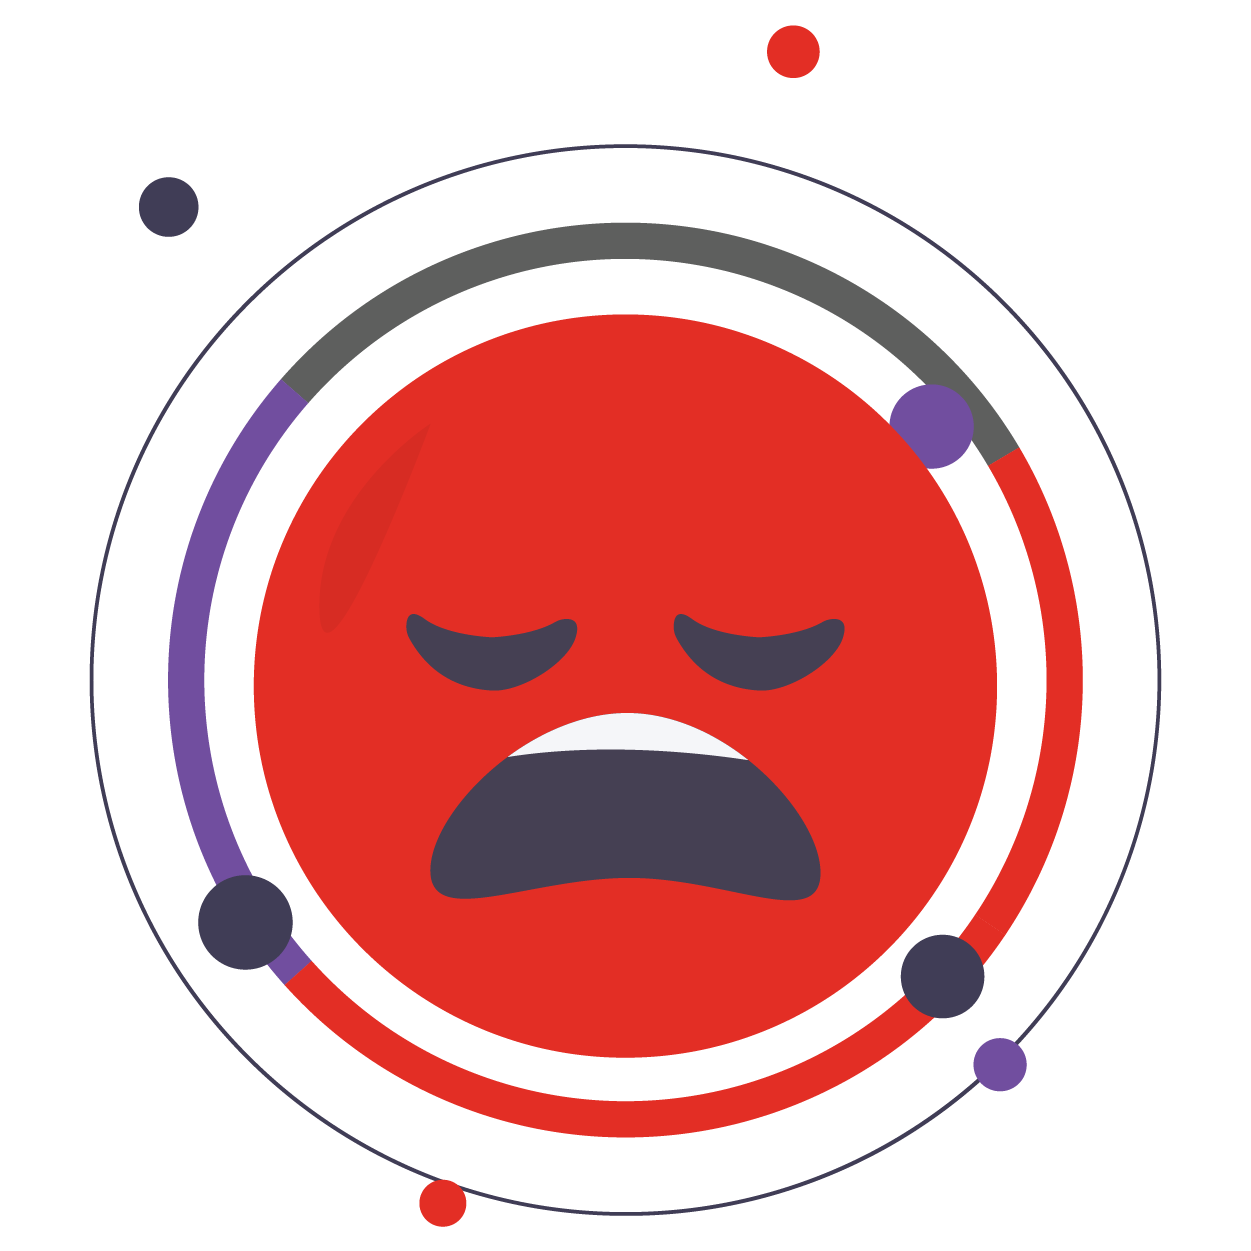 sad face icon for motivational speaker topic about dealing with failure